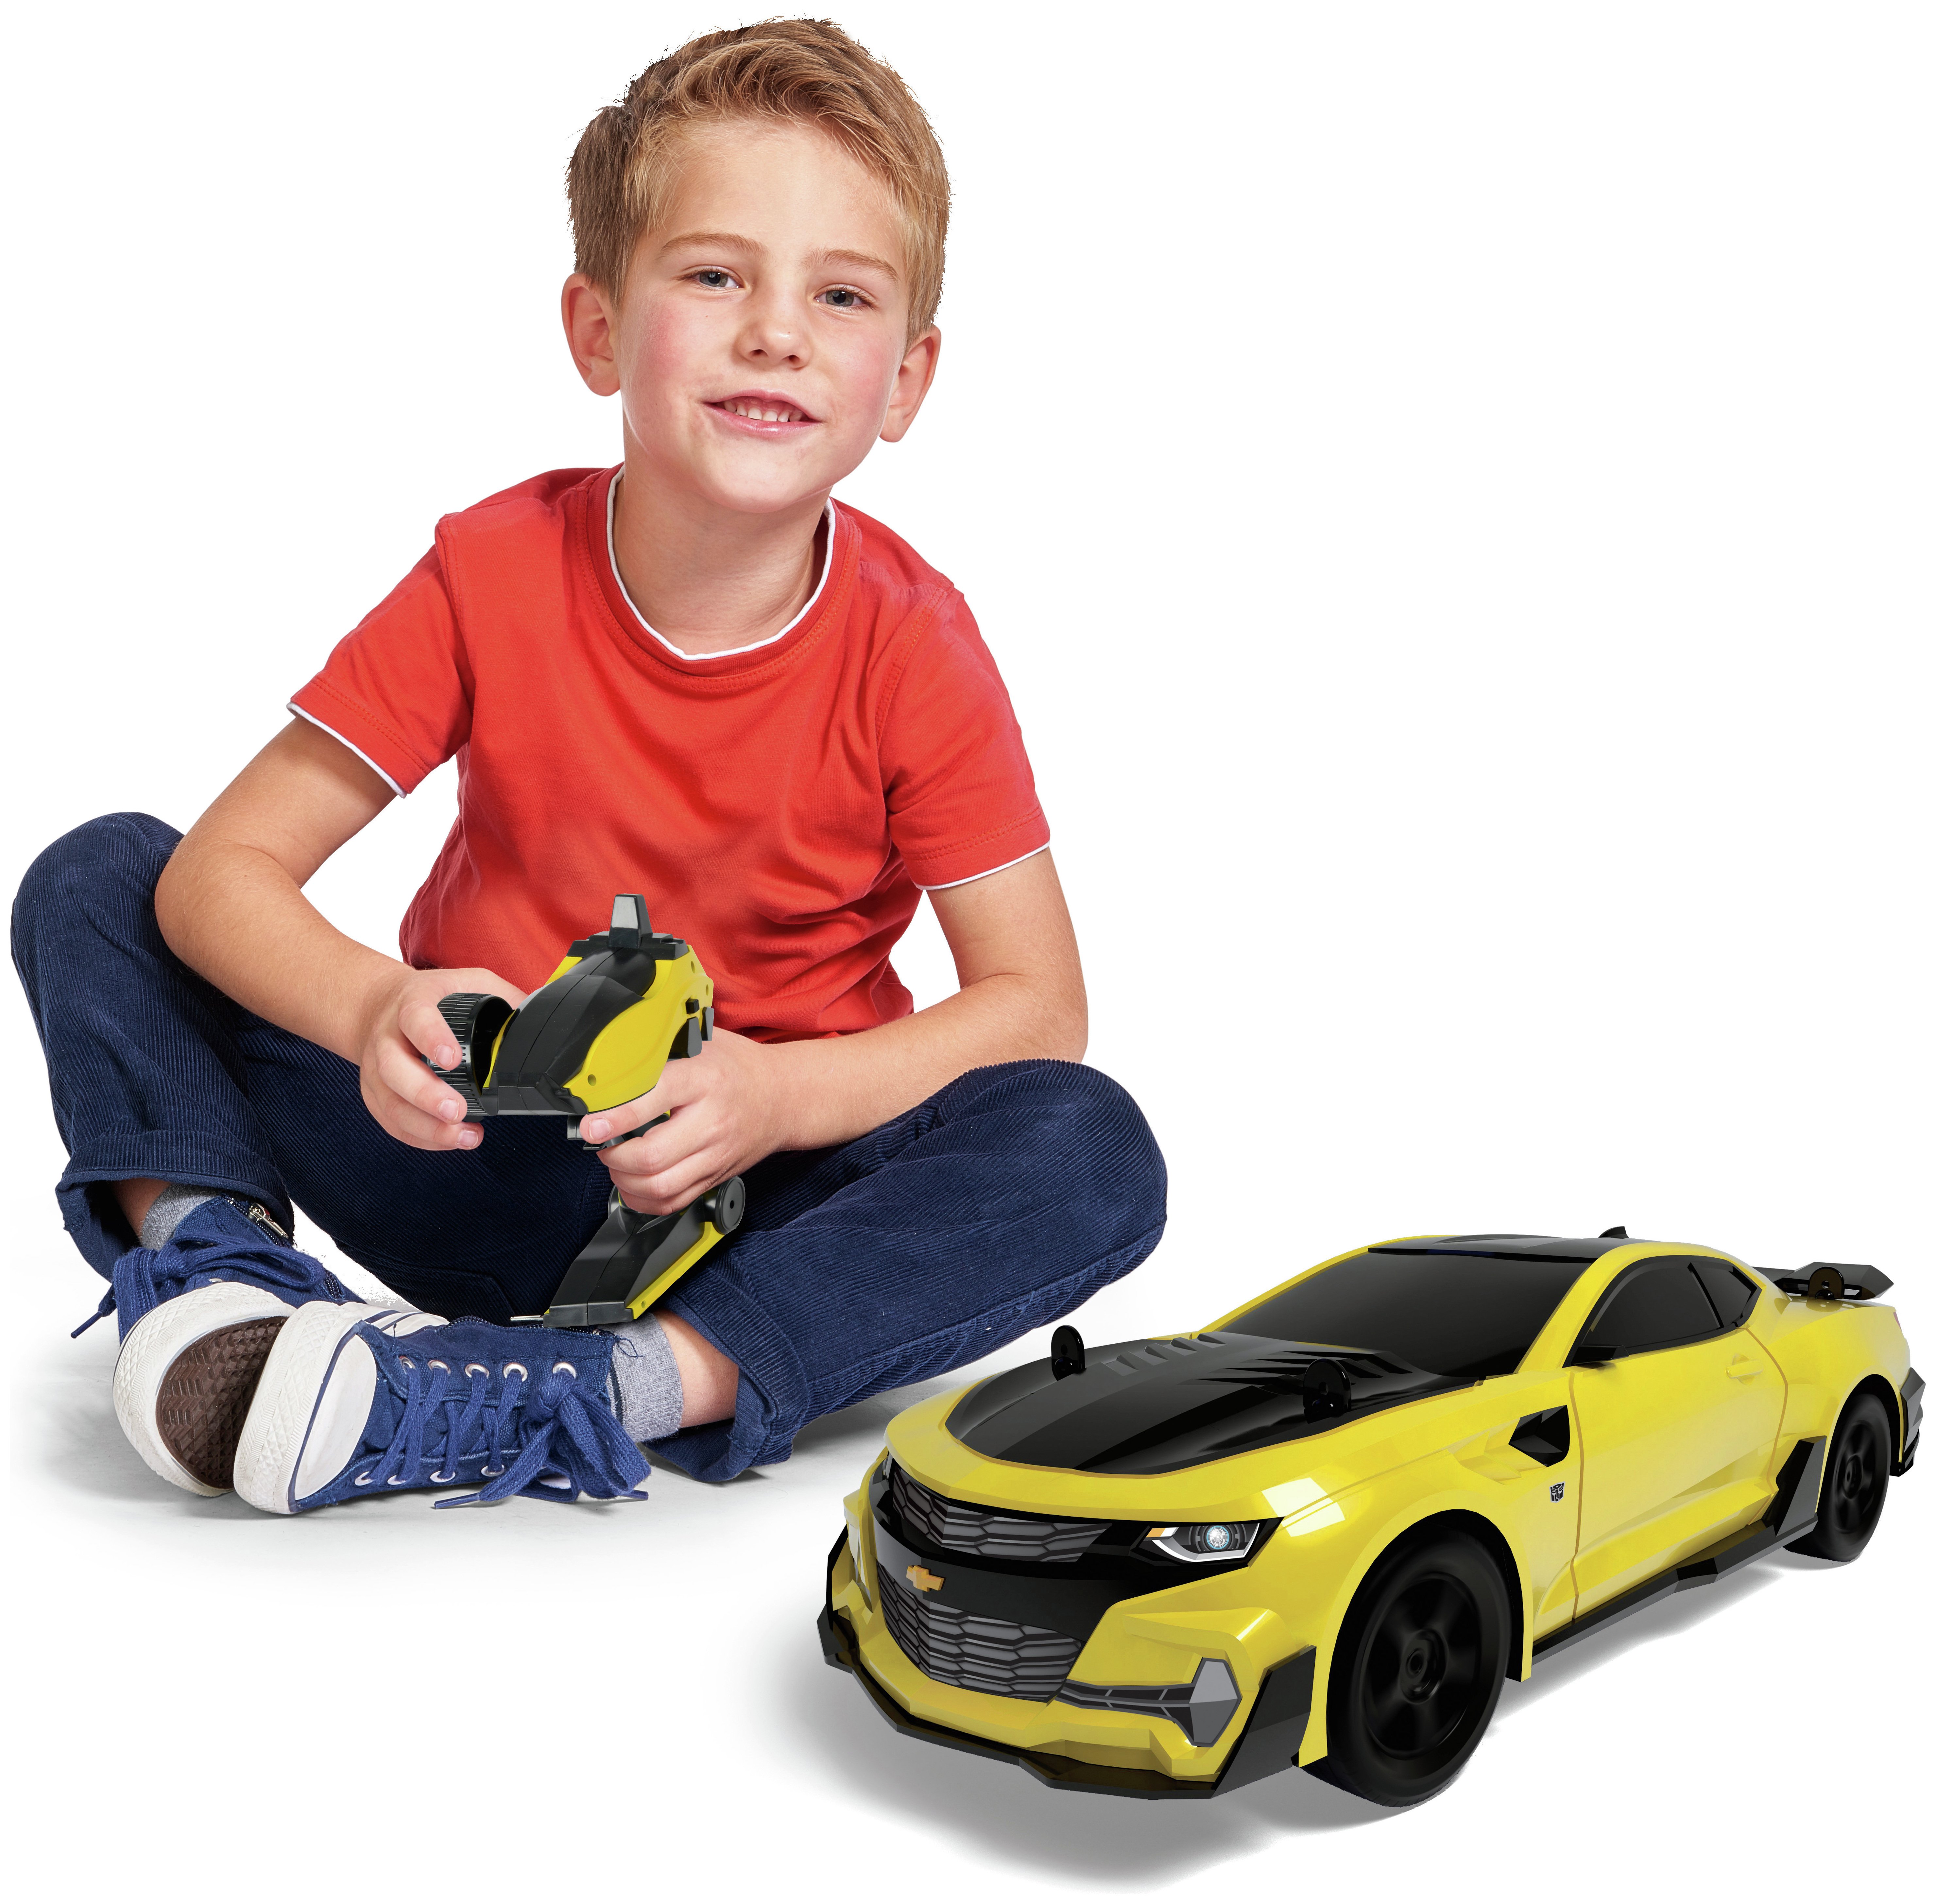 Transformers: The Last Knight Giant RC Bumblebee Car 1:10